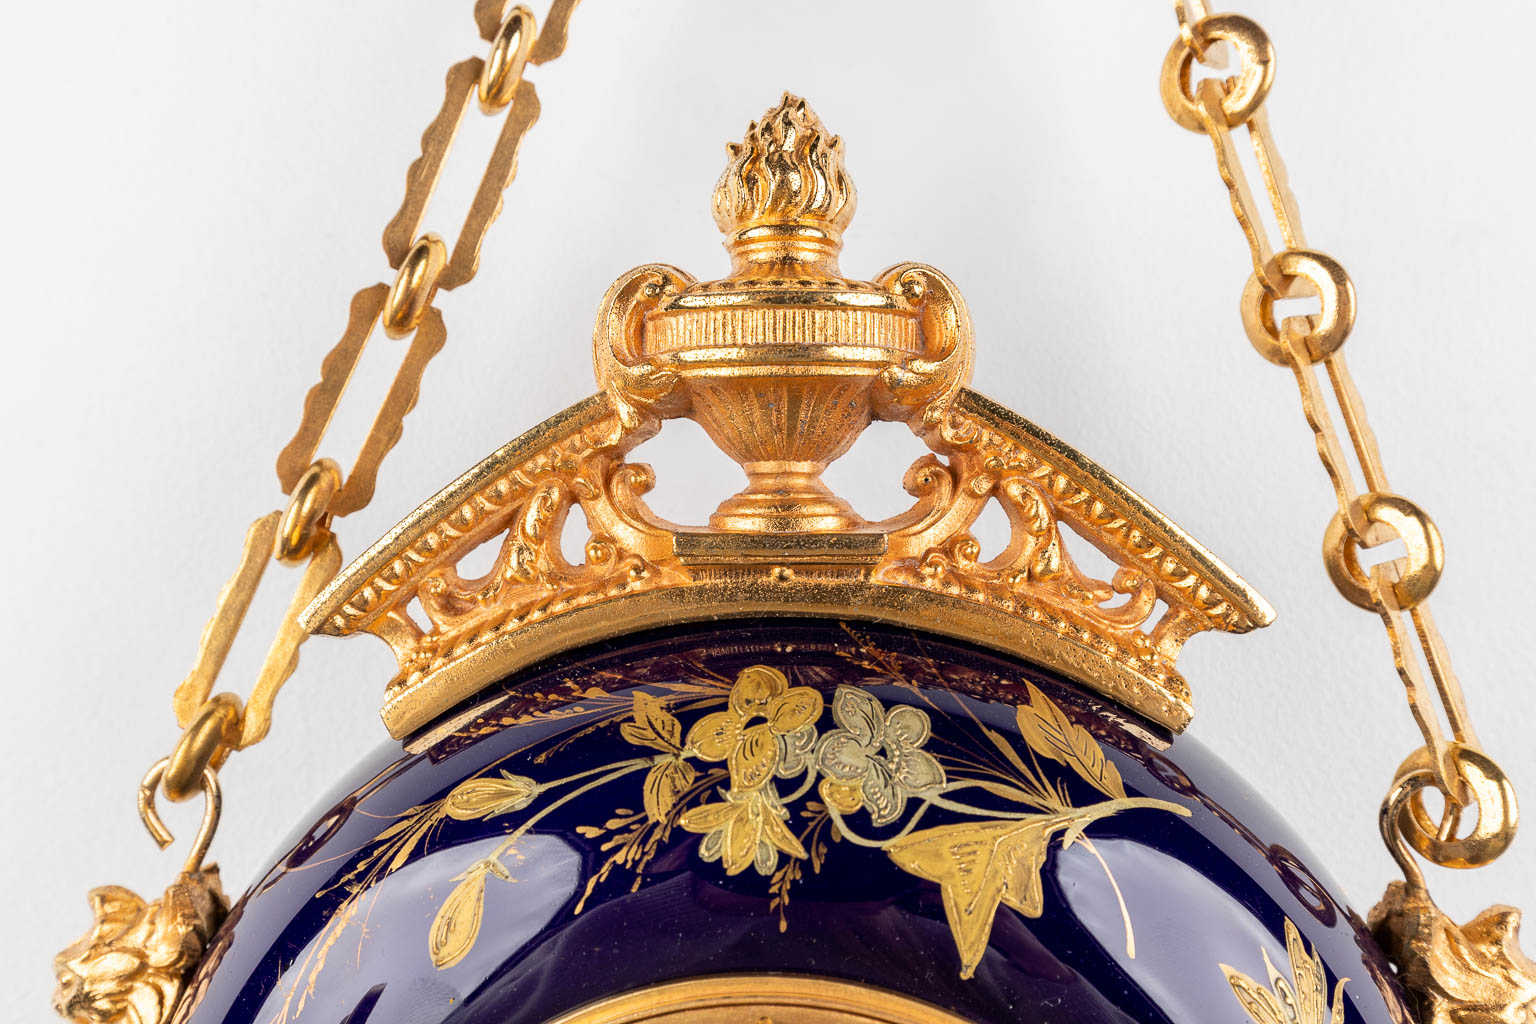 A hanging wall clock, cobalt blue porcelain mounted with bronze. 19th C. (W:26 x H:36 cm)